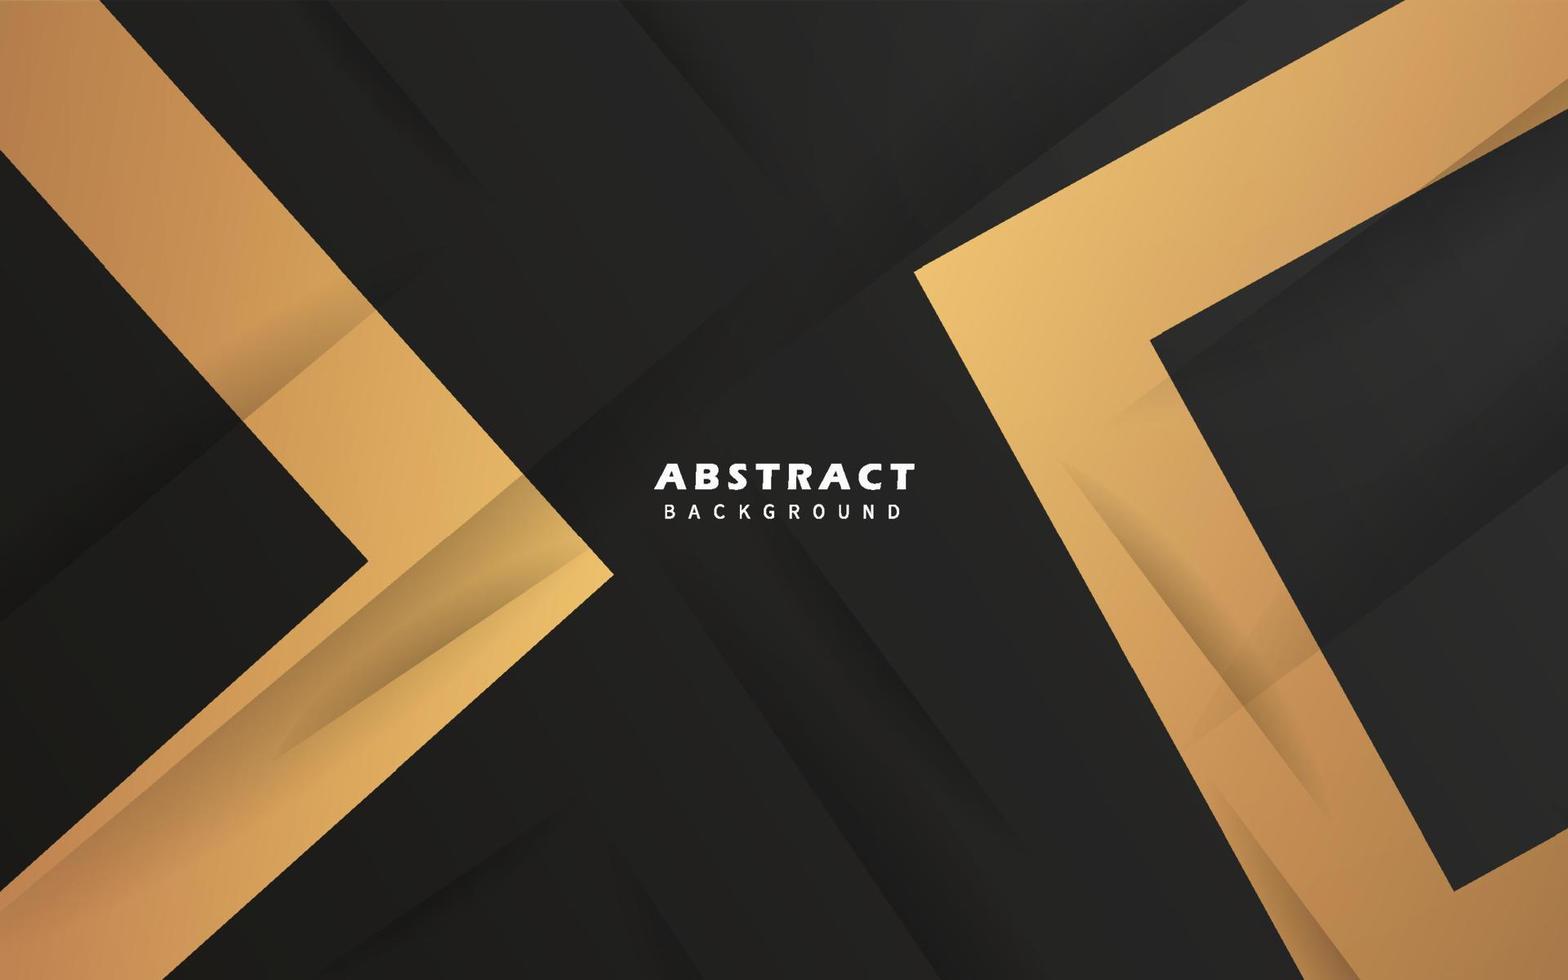 Abstract geometric shape shape black and gold background vector